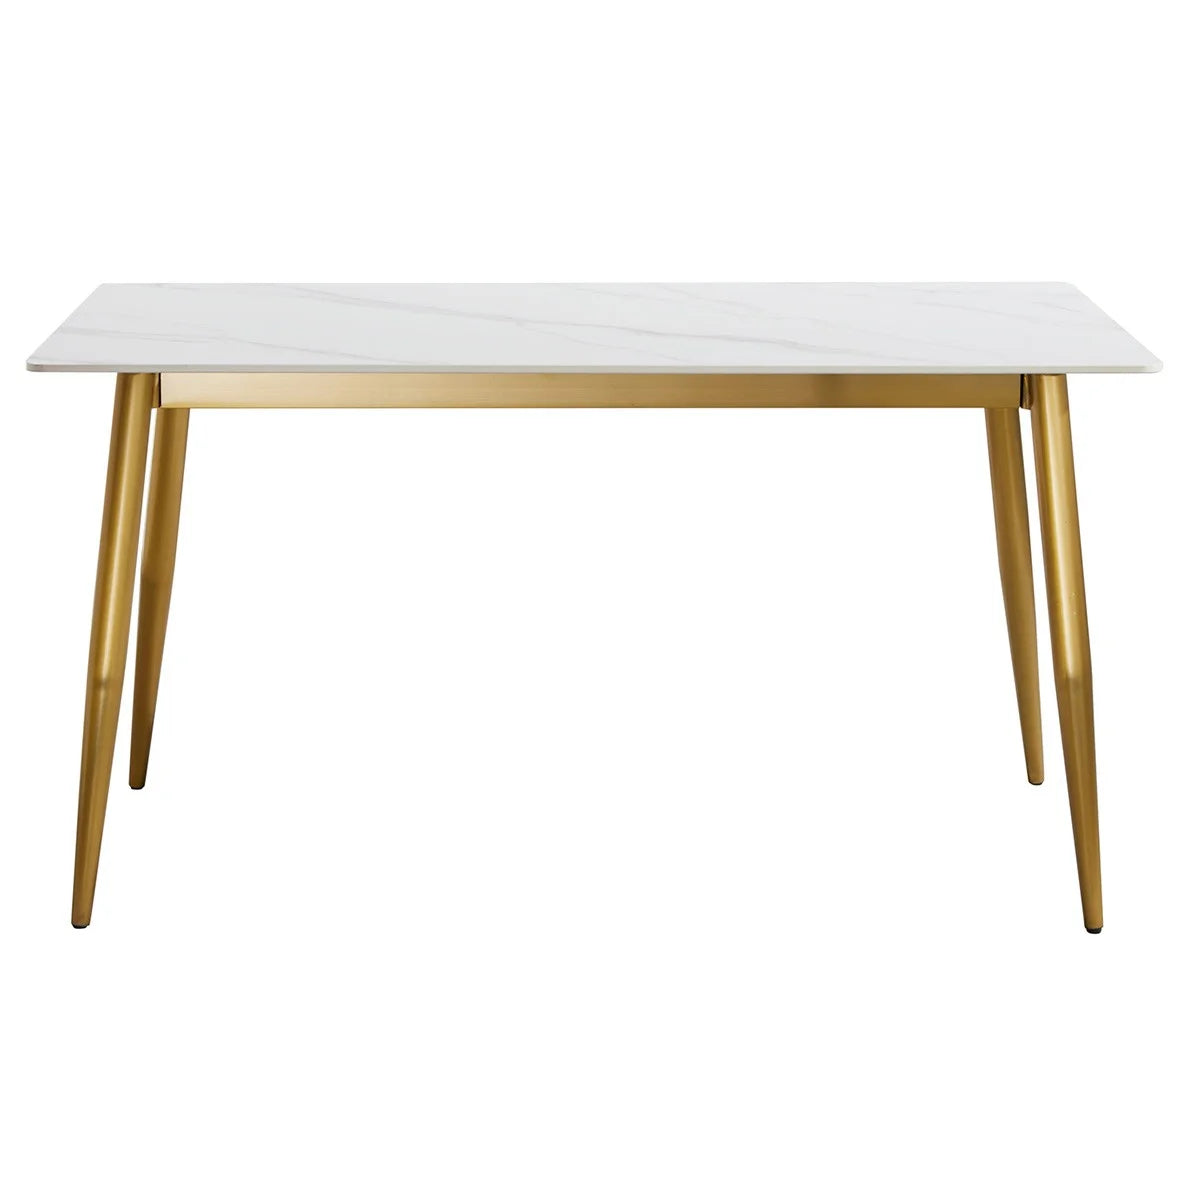 Tecia Sintered Stone Dining Table, Matte Surface Top